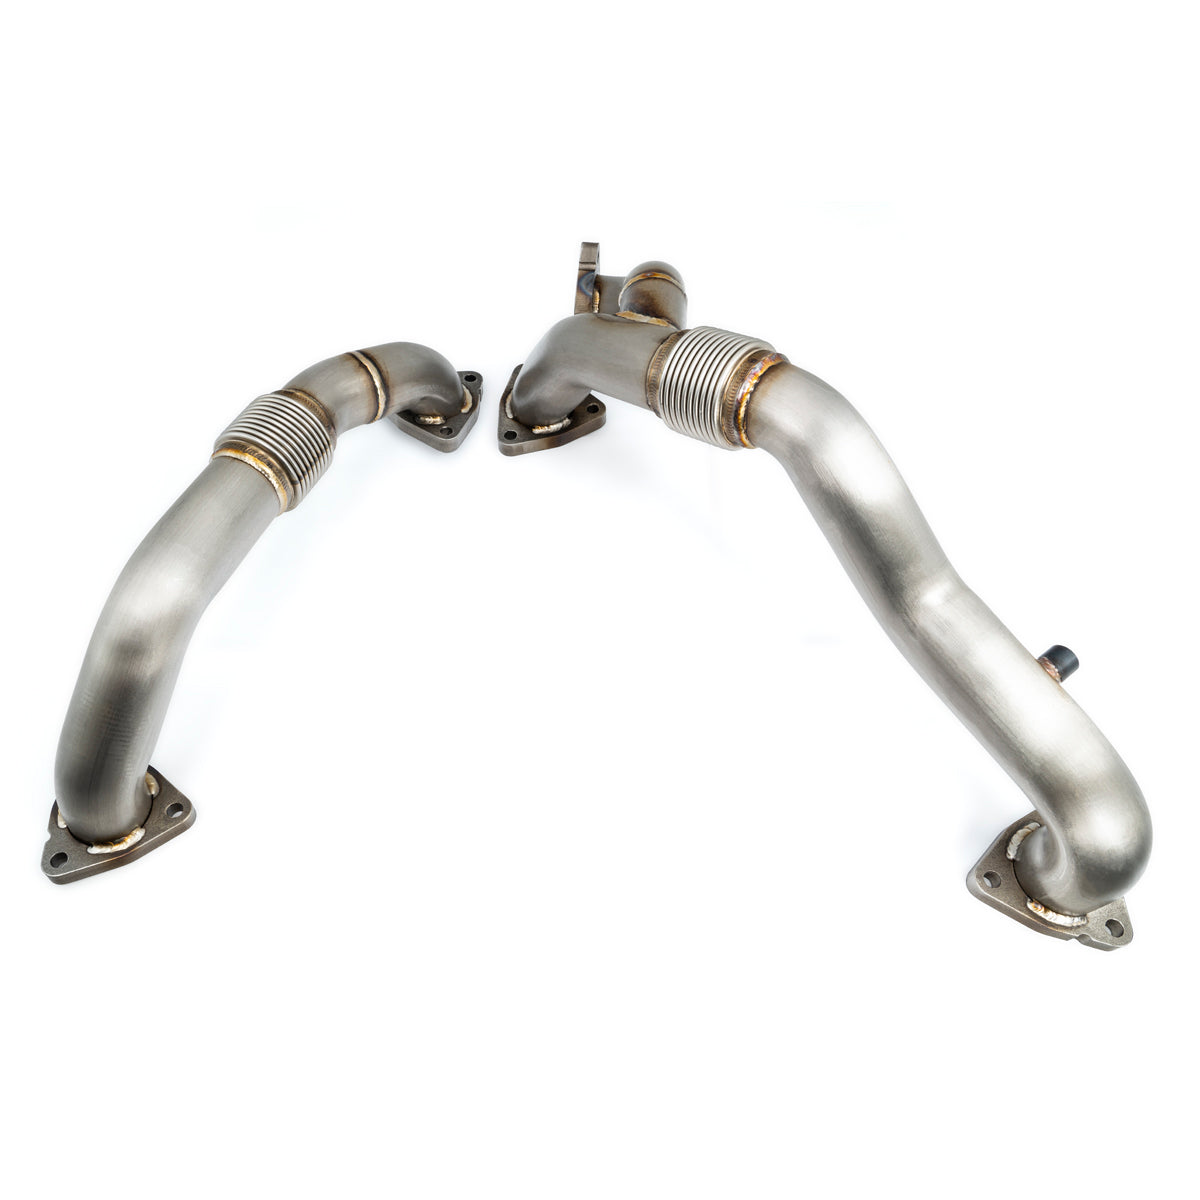 Up-Pipes Ford 6.4L 08-10 PPE Diesel